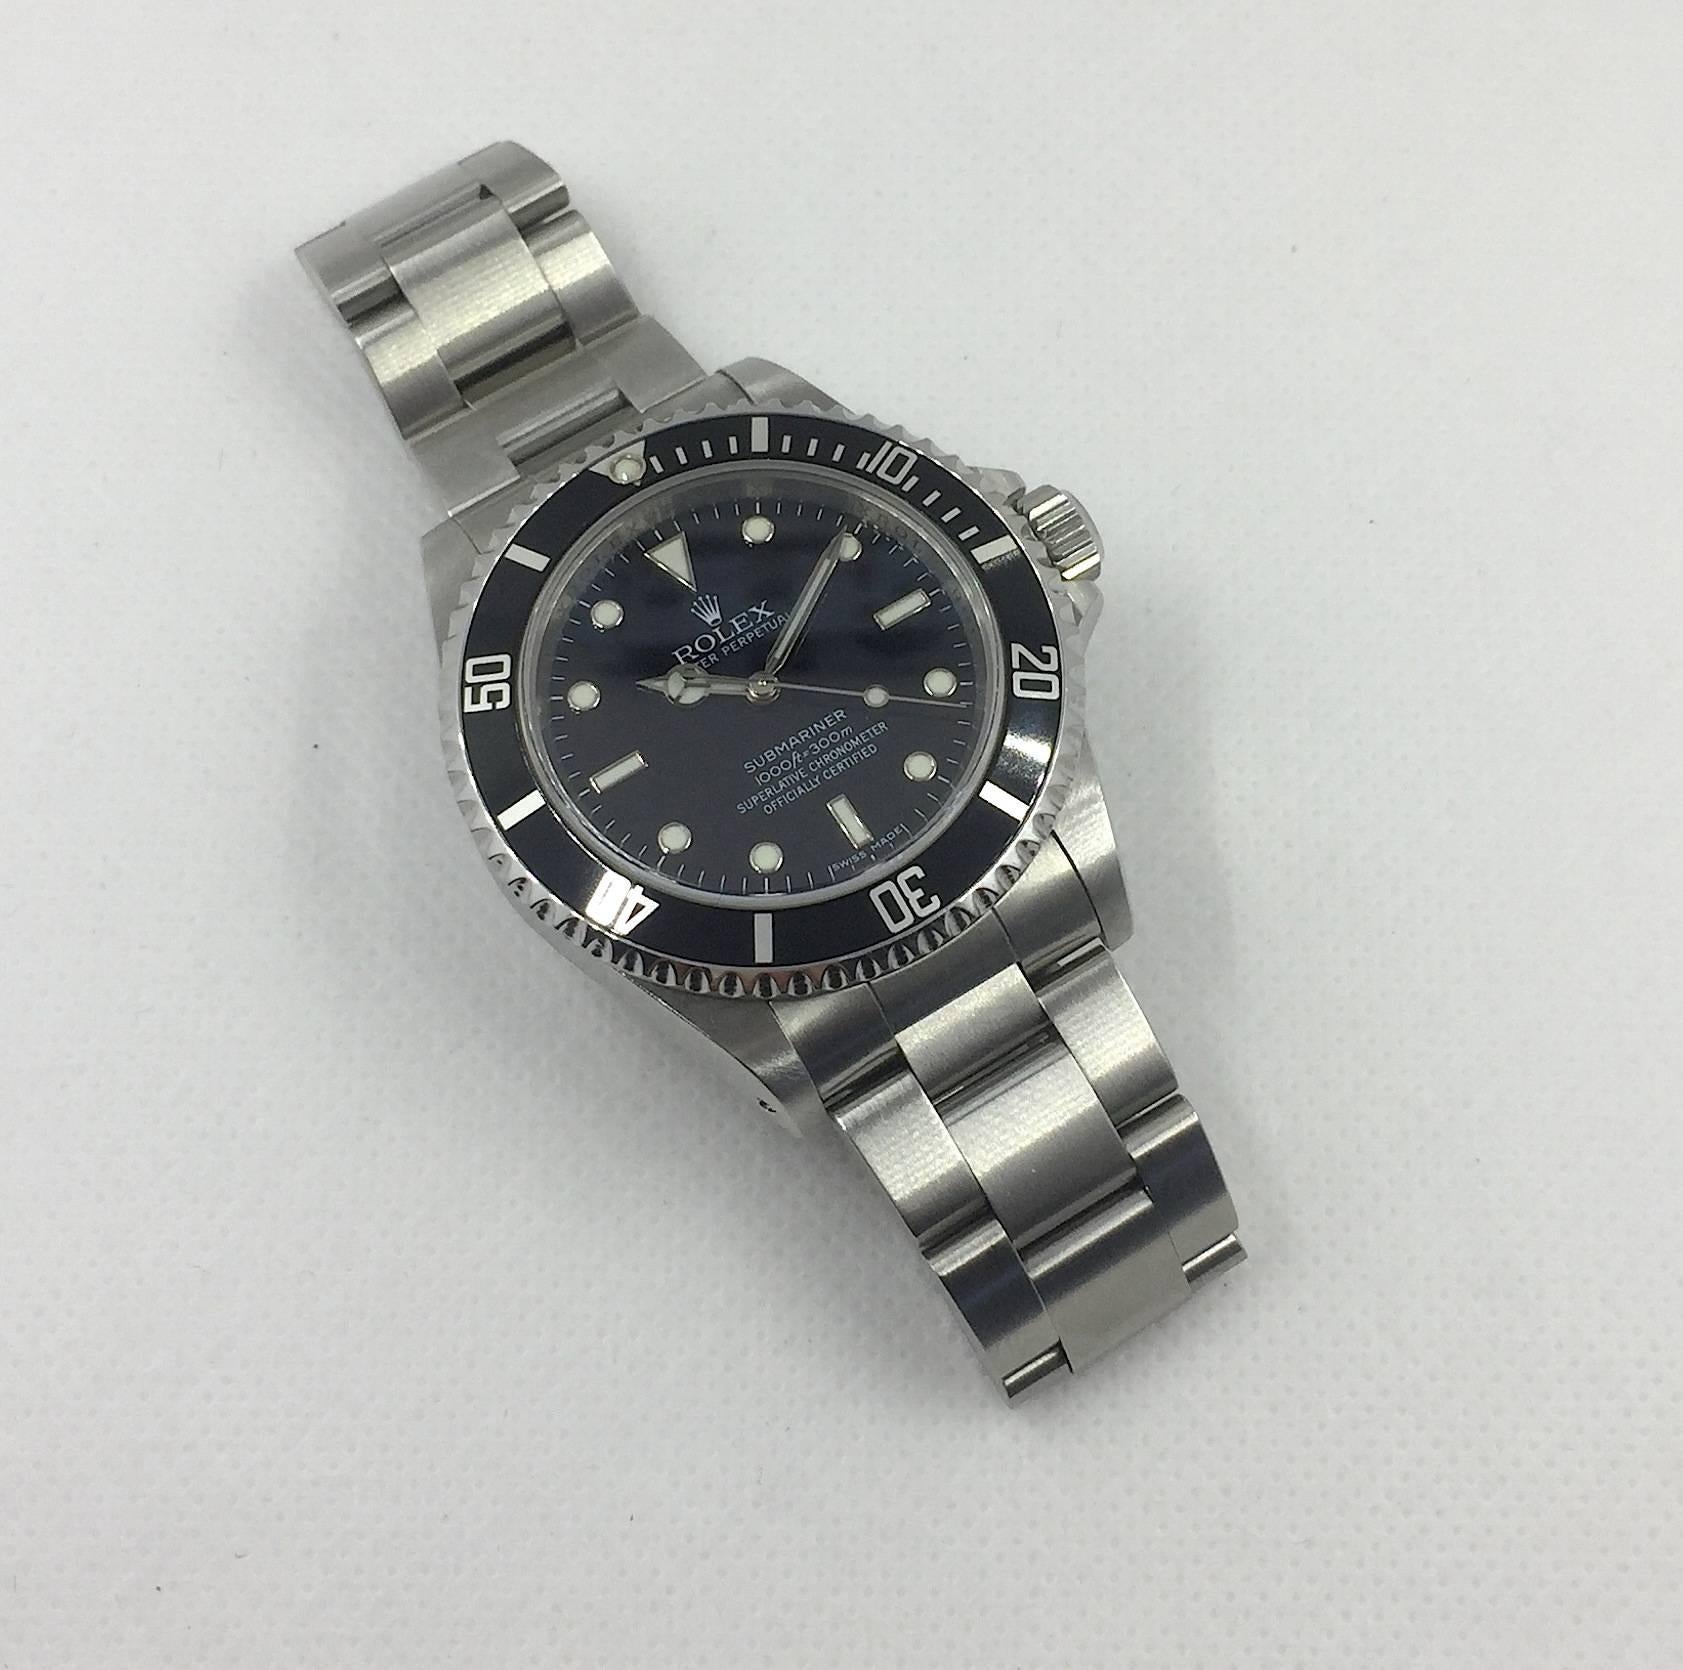 Women's or Men's Rolex Stainless Steel Oyster Perpetual Submariner Wristwatch Ref 14060M